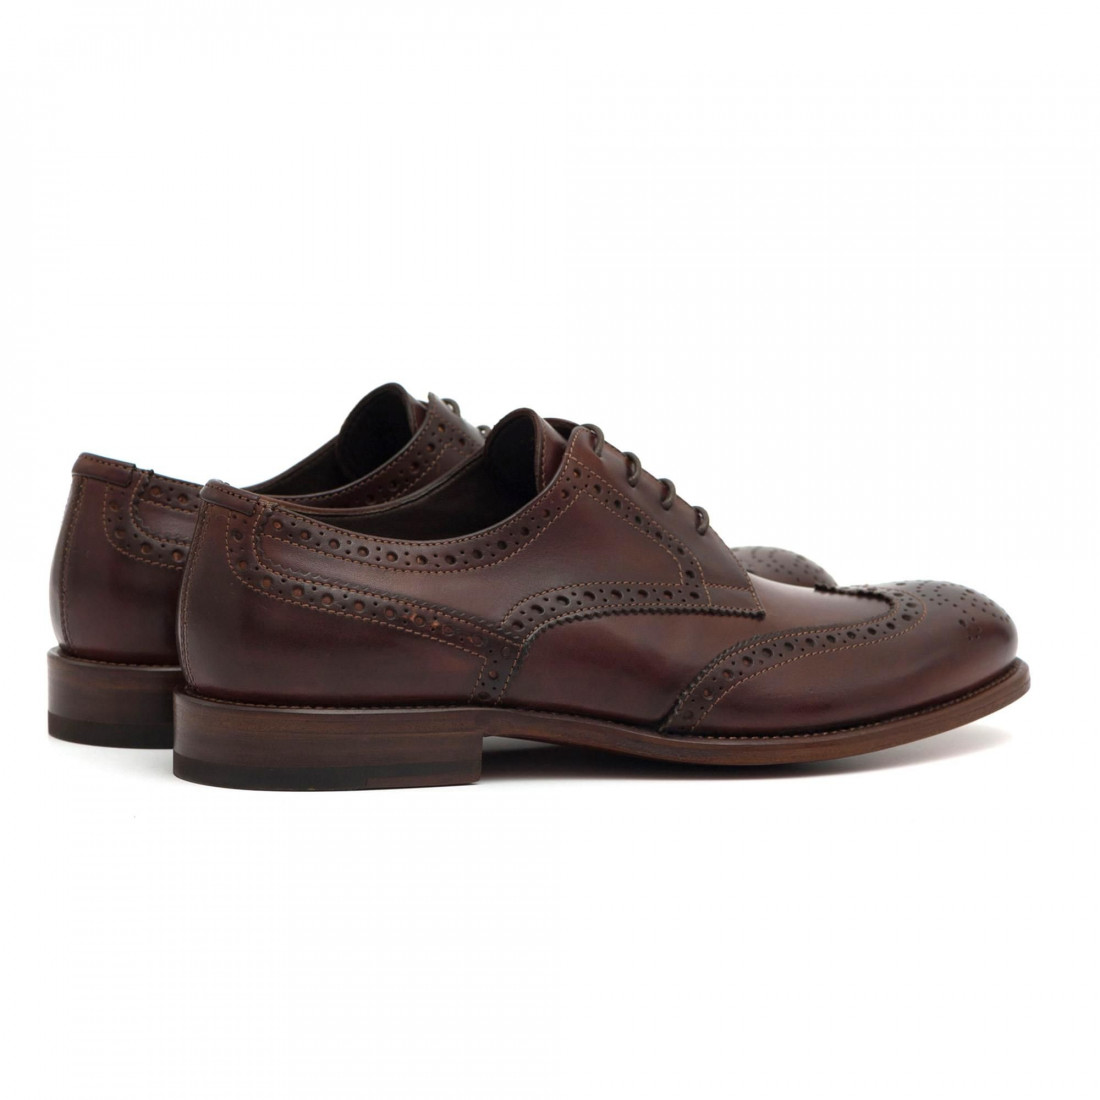 Wing tip derby shoes in brown leather